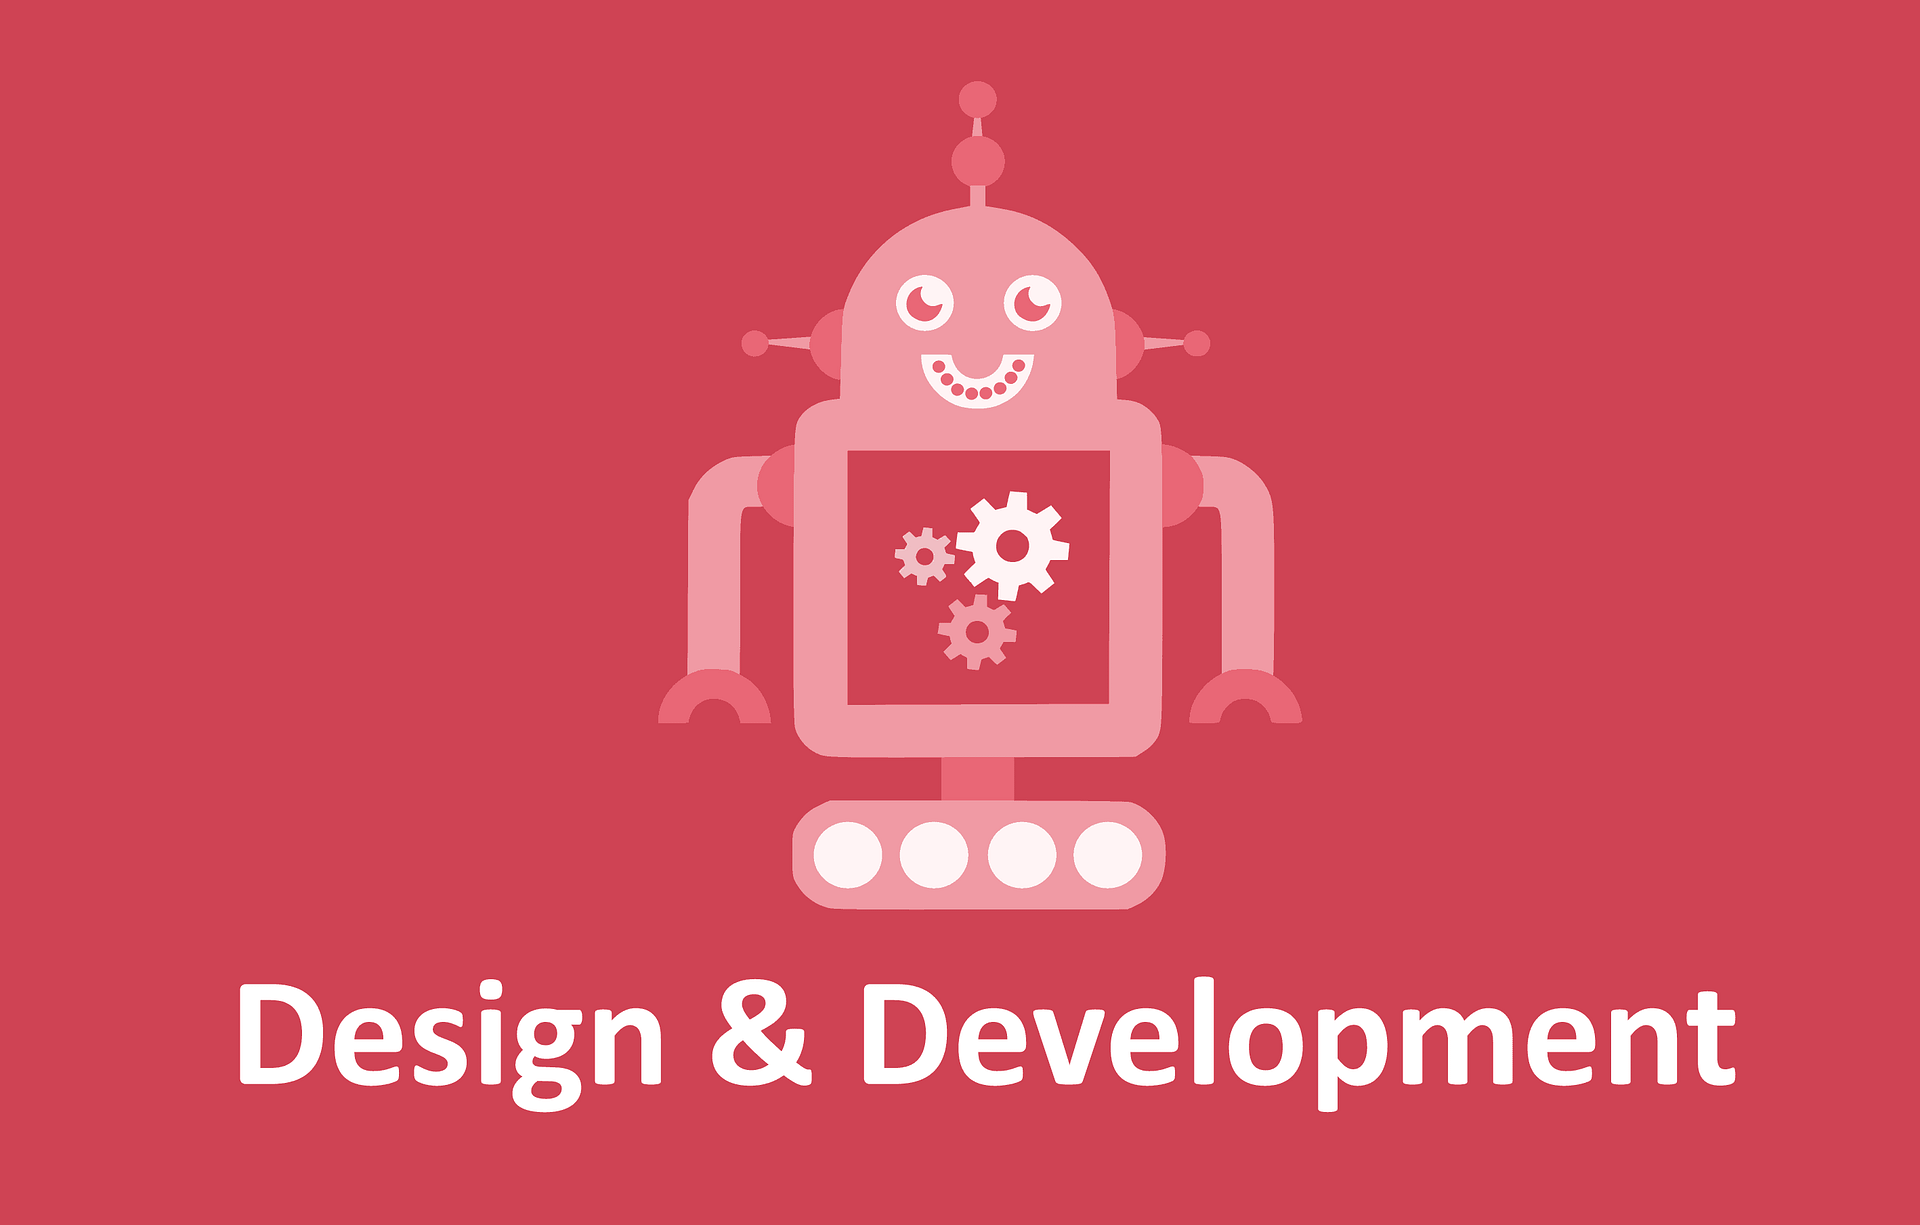 Organisational Design for Design and development roles including CAD, CAE, and CAM.